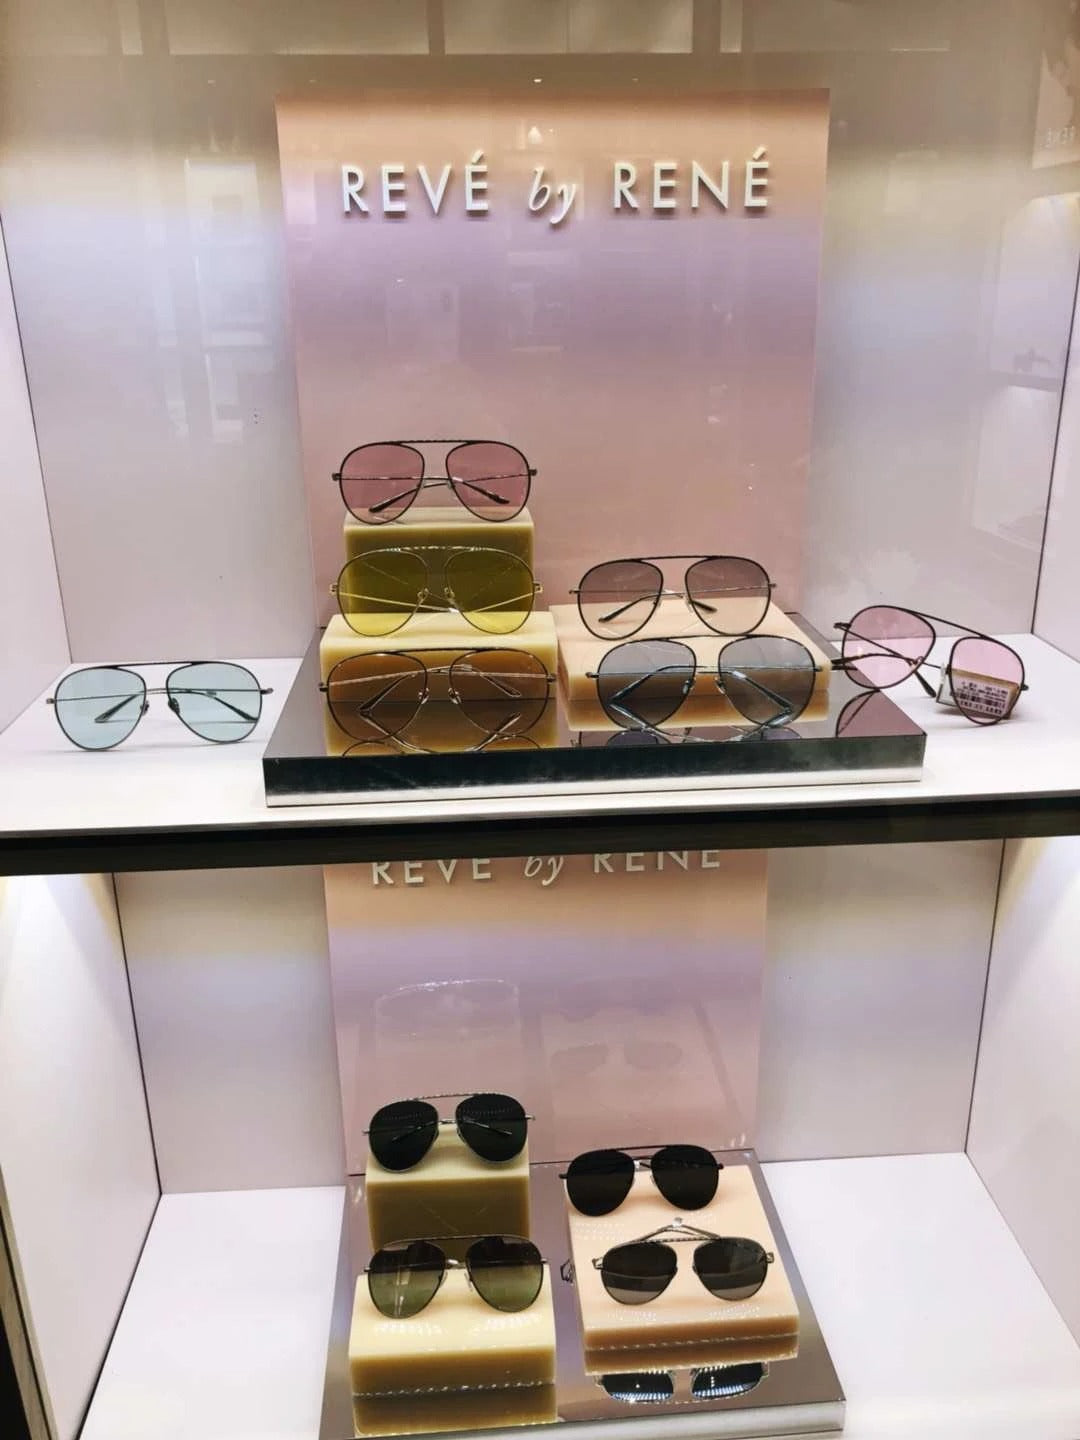 REVE by RENE puyi Beijing event